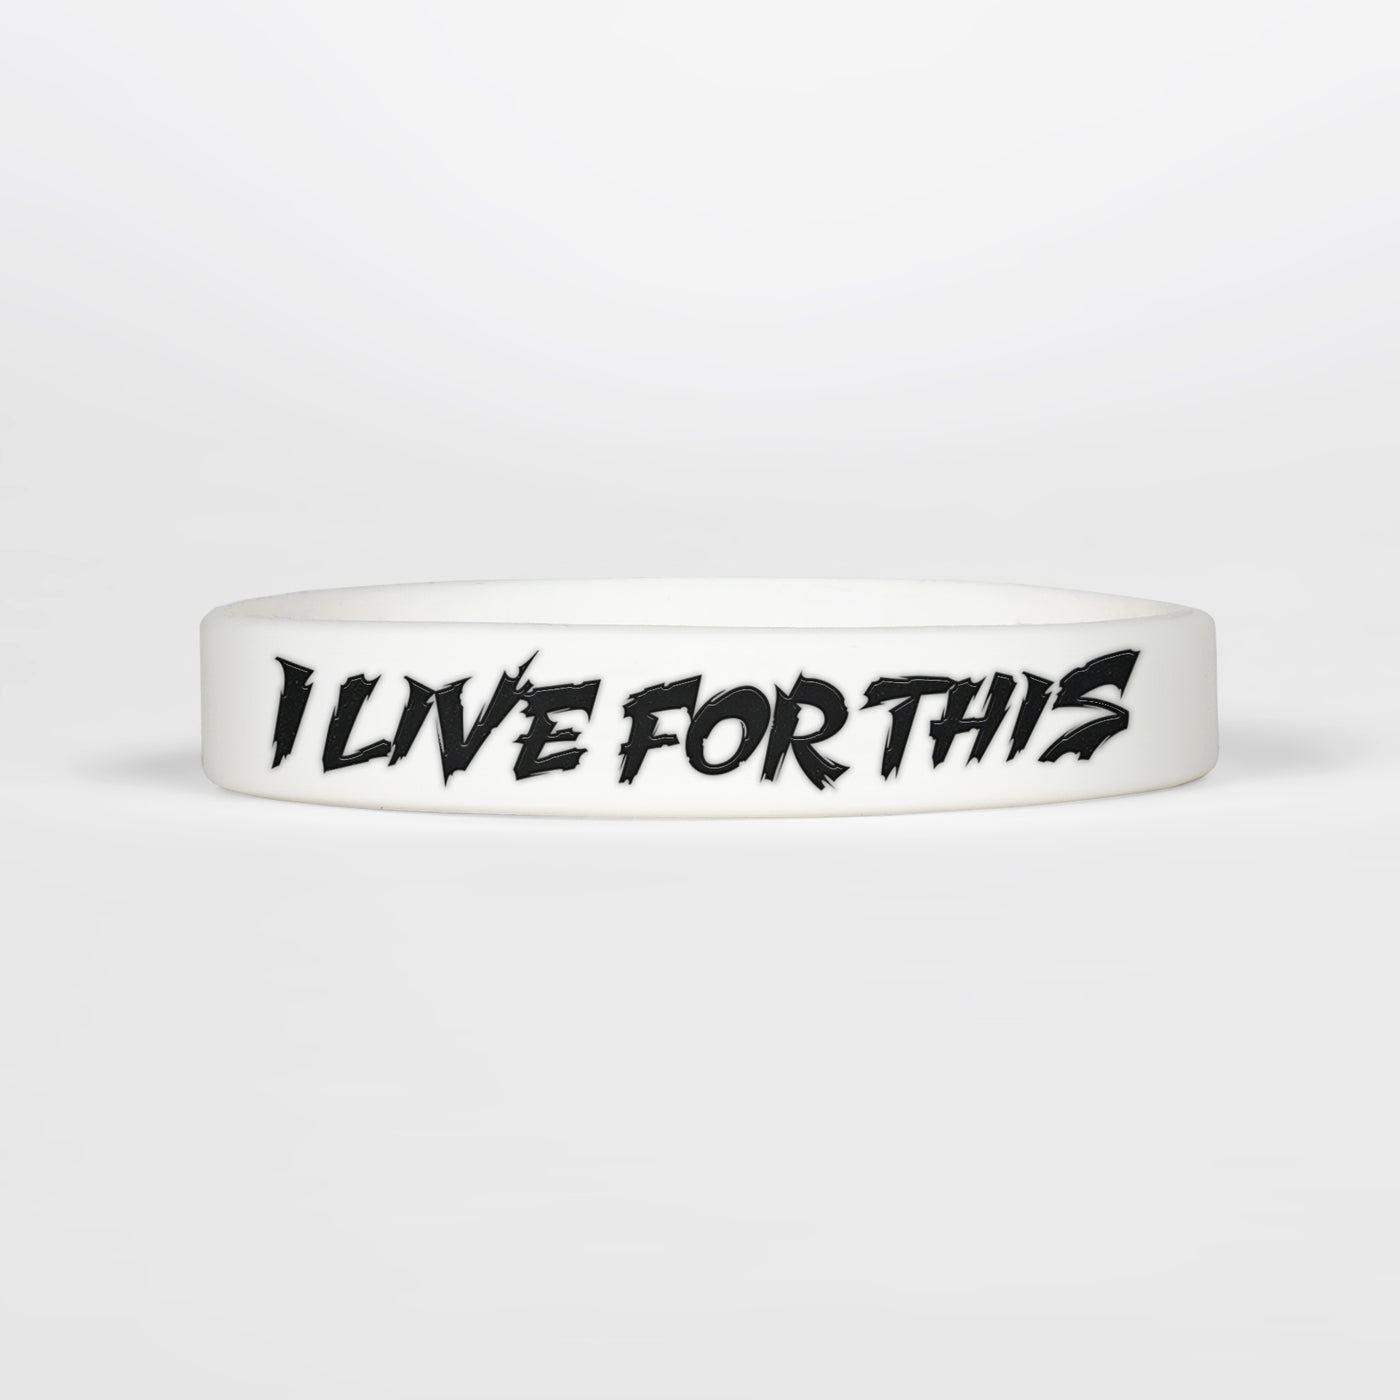 I Live For This Motivational Wristband